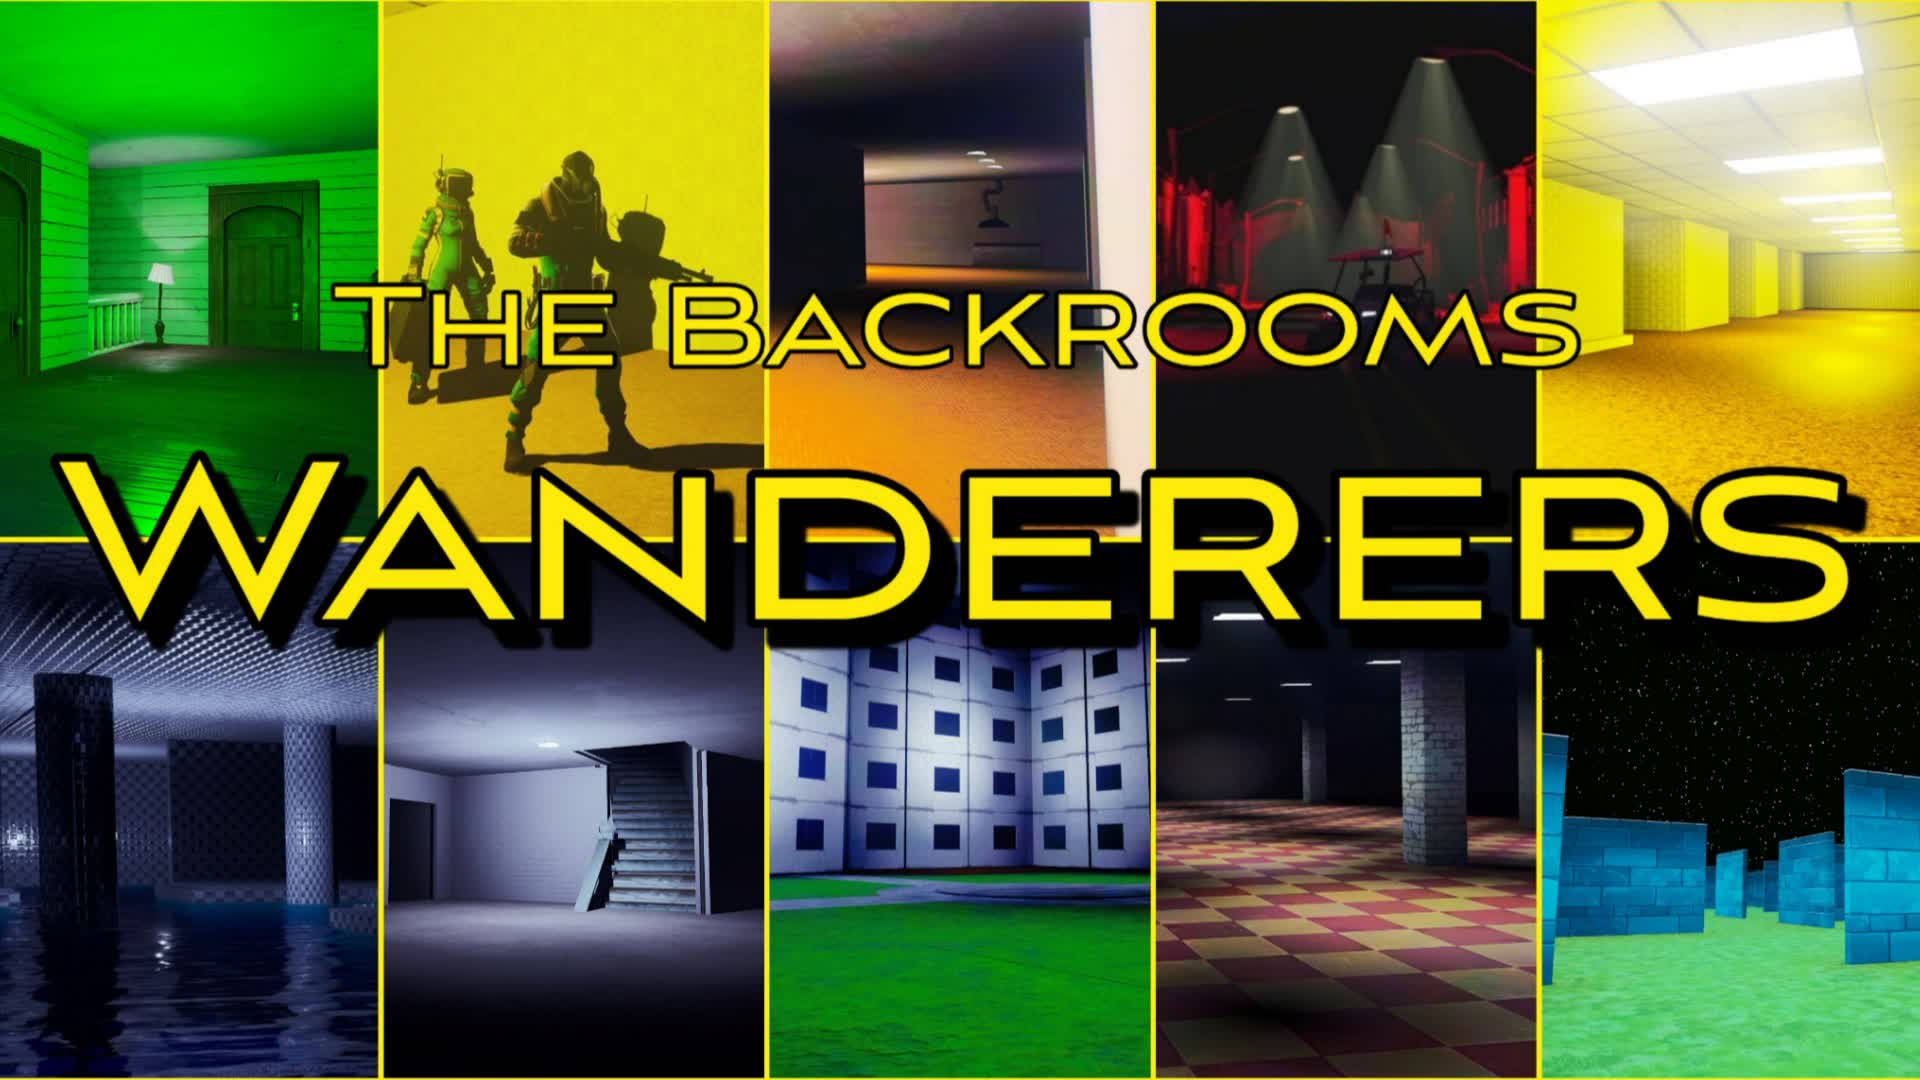 The Backrooms - Gallery